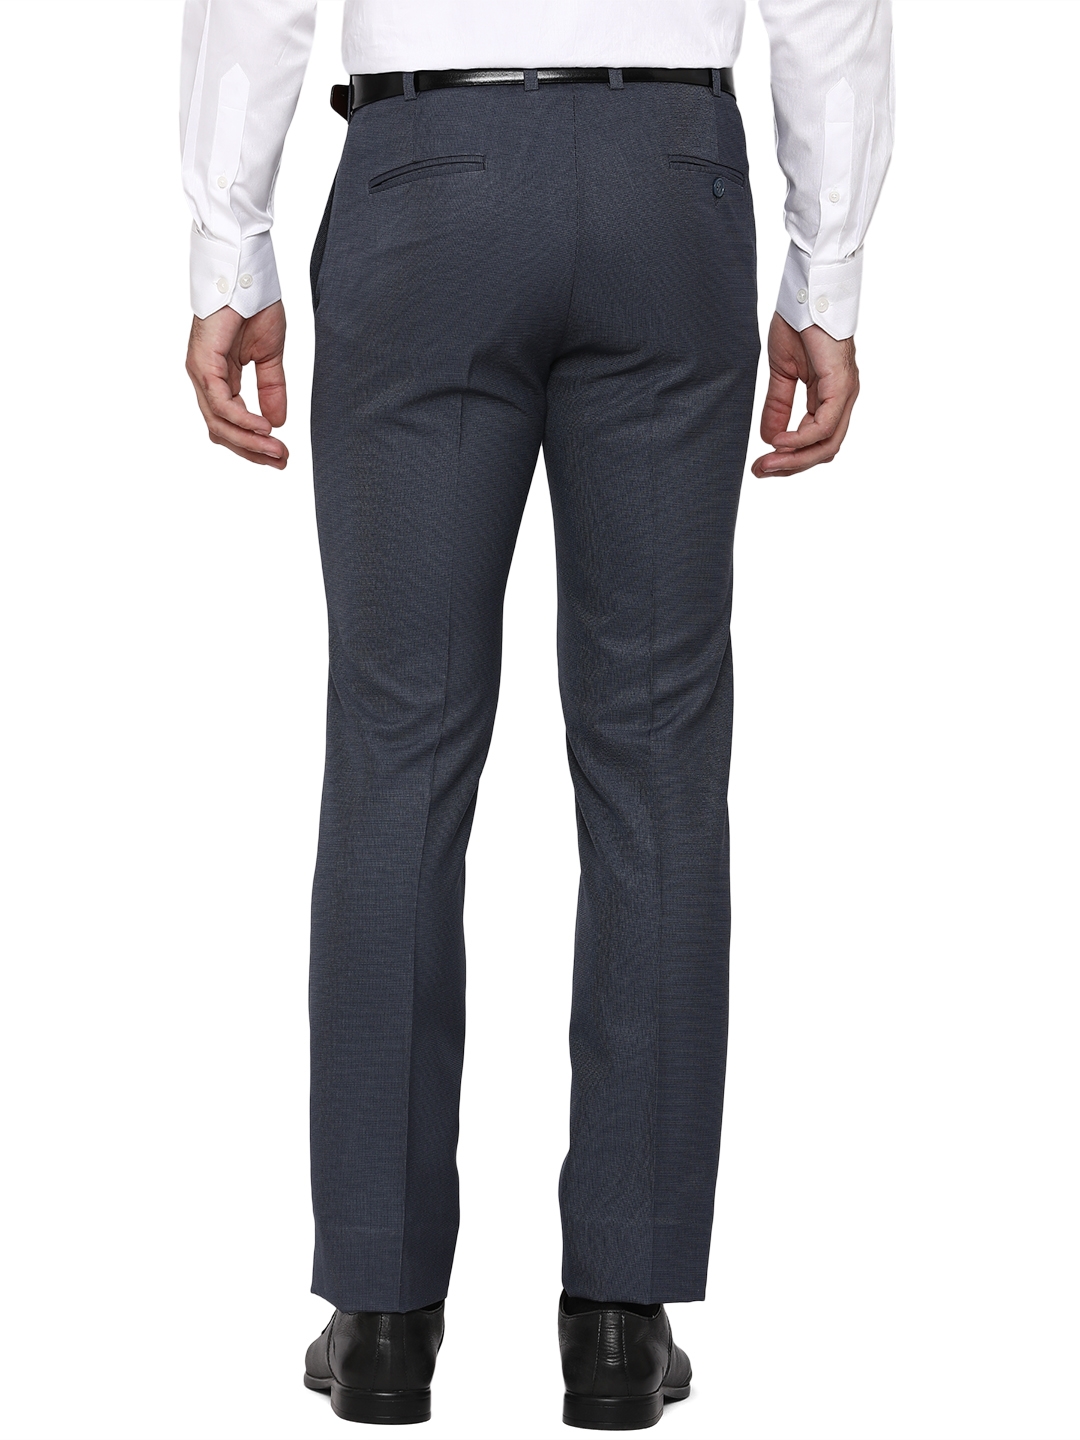 Greenfibre | Navy Blue Solid Slim Fit Formal Trouser | Greenfibre 2